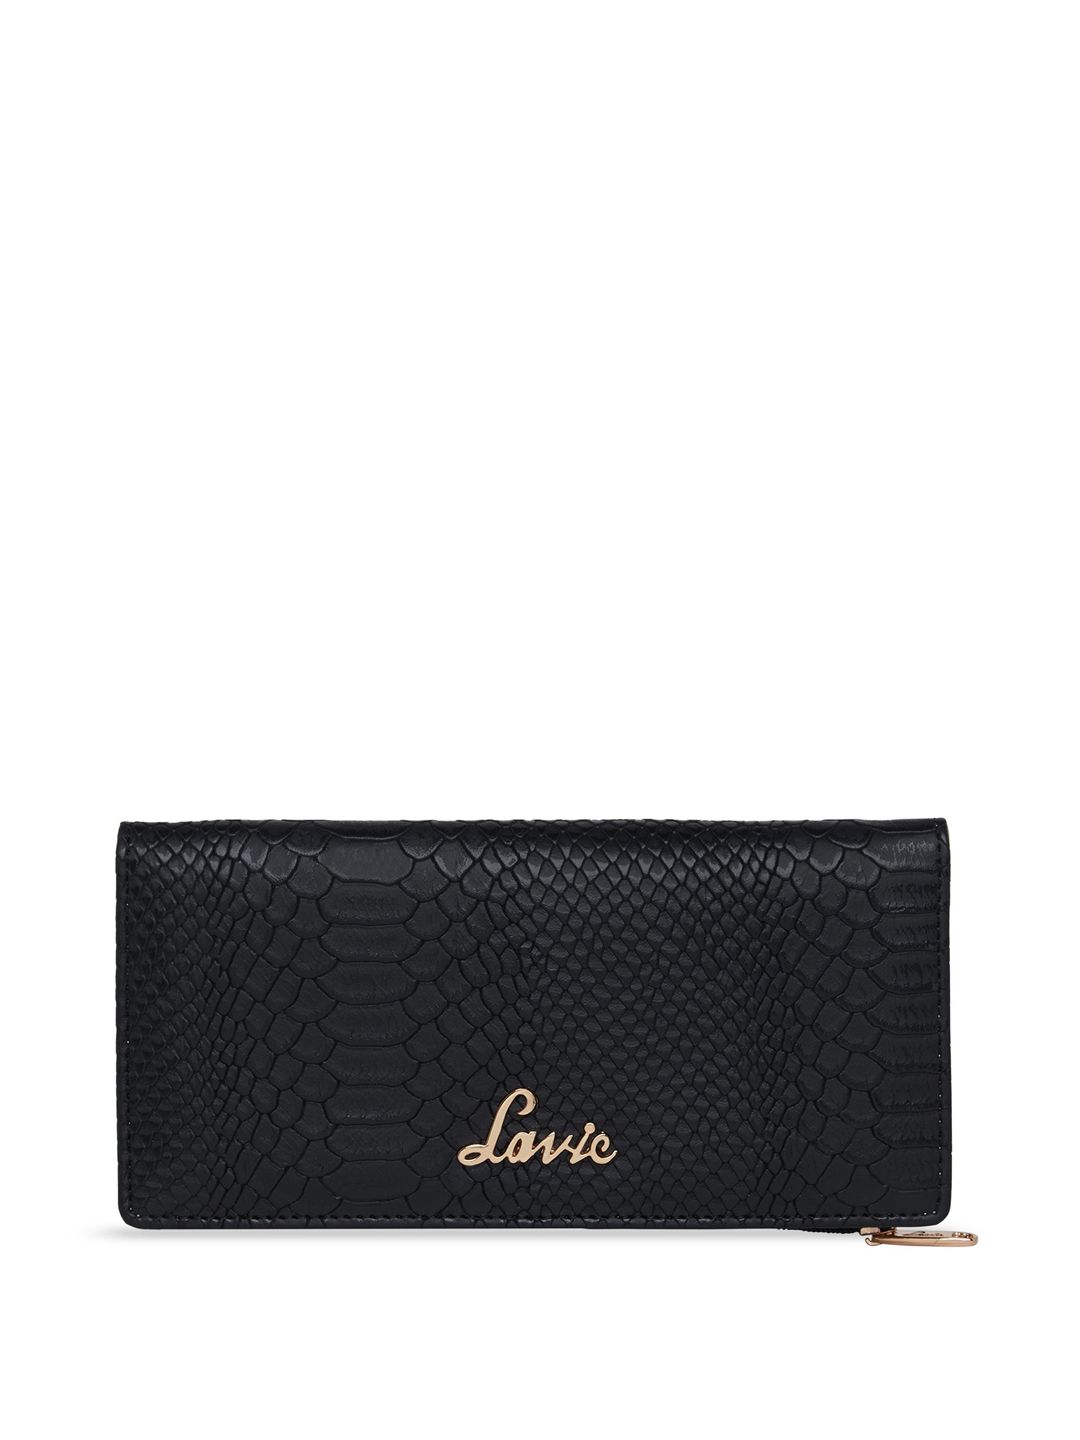 Lavie Women Black Textured Two Fold Wallet Price in India